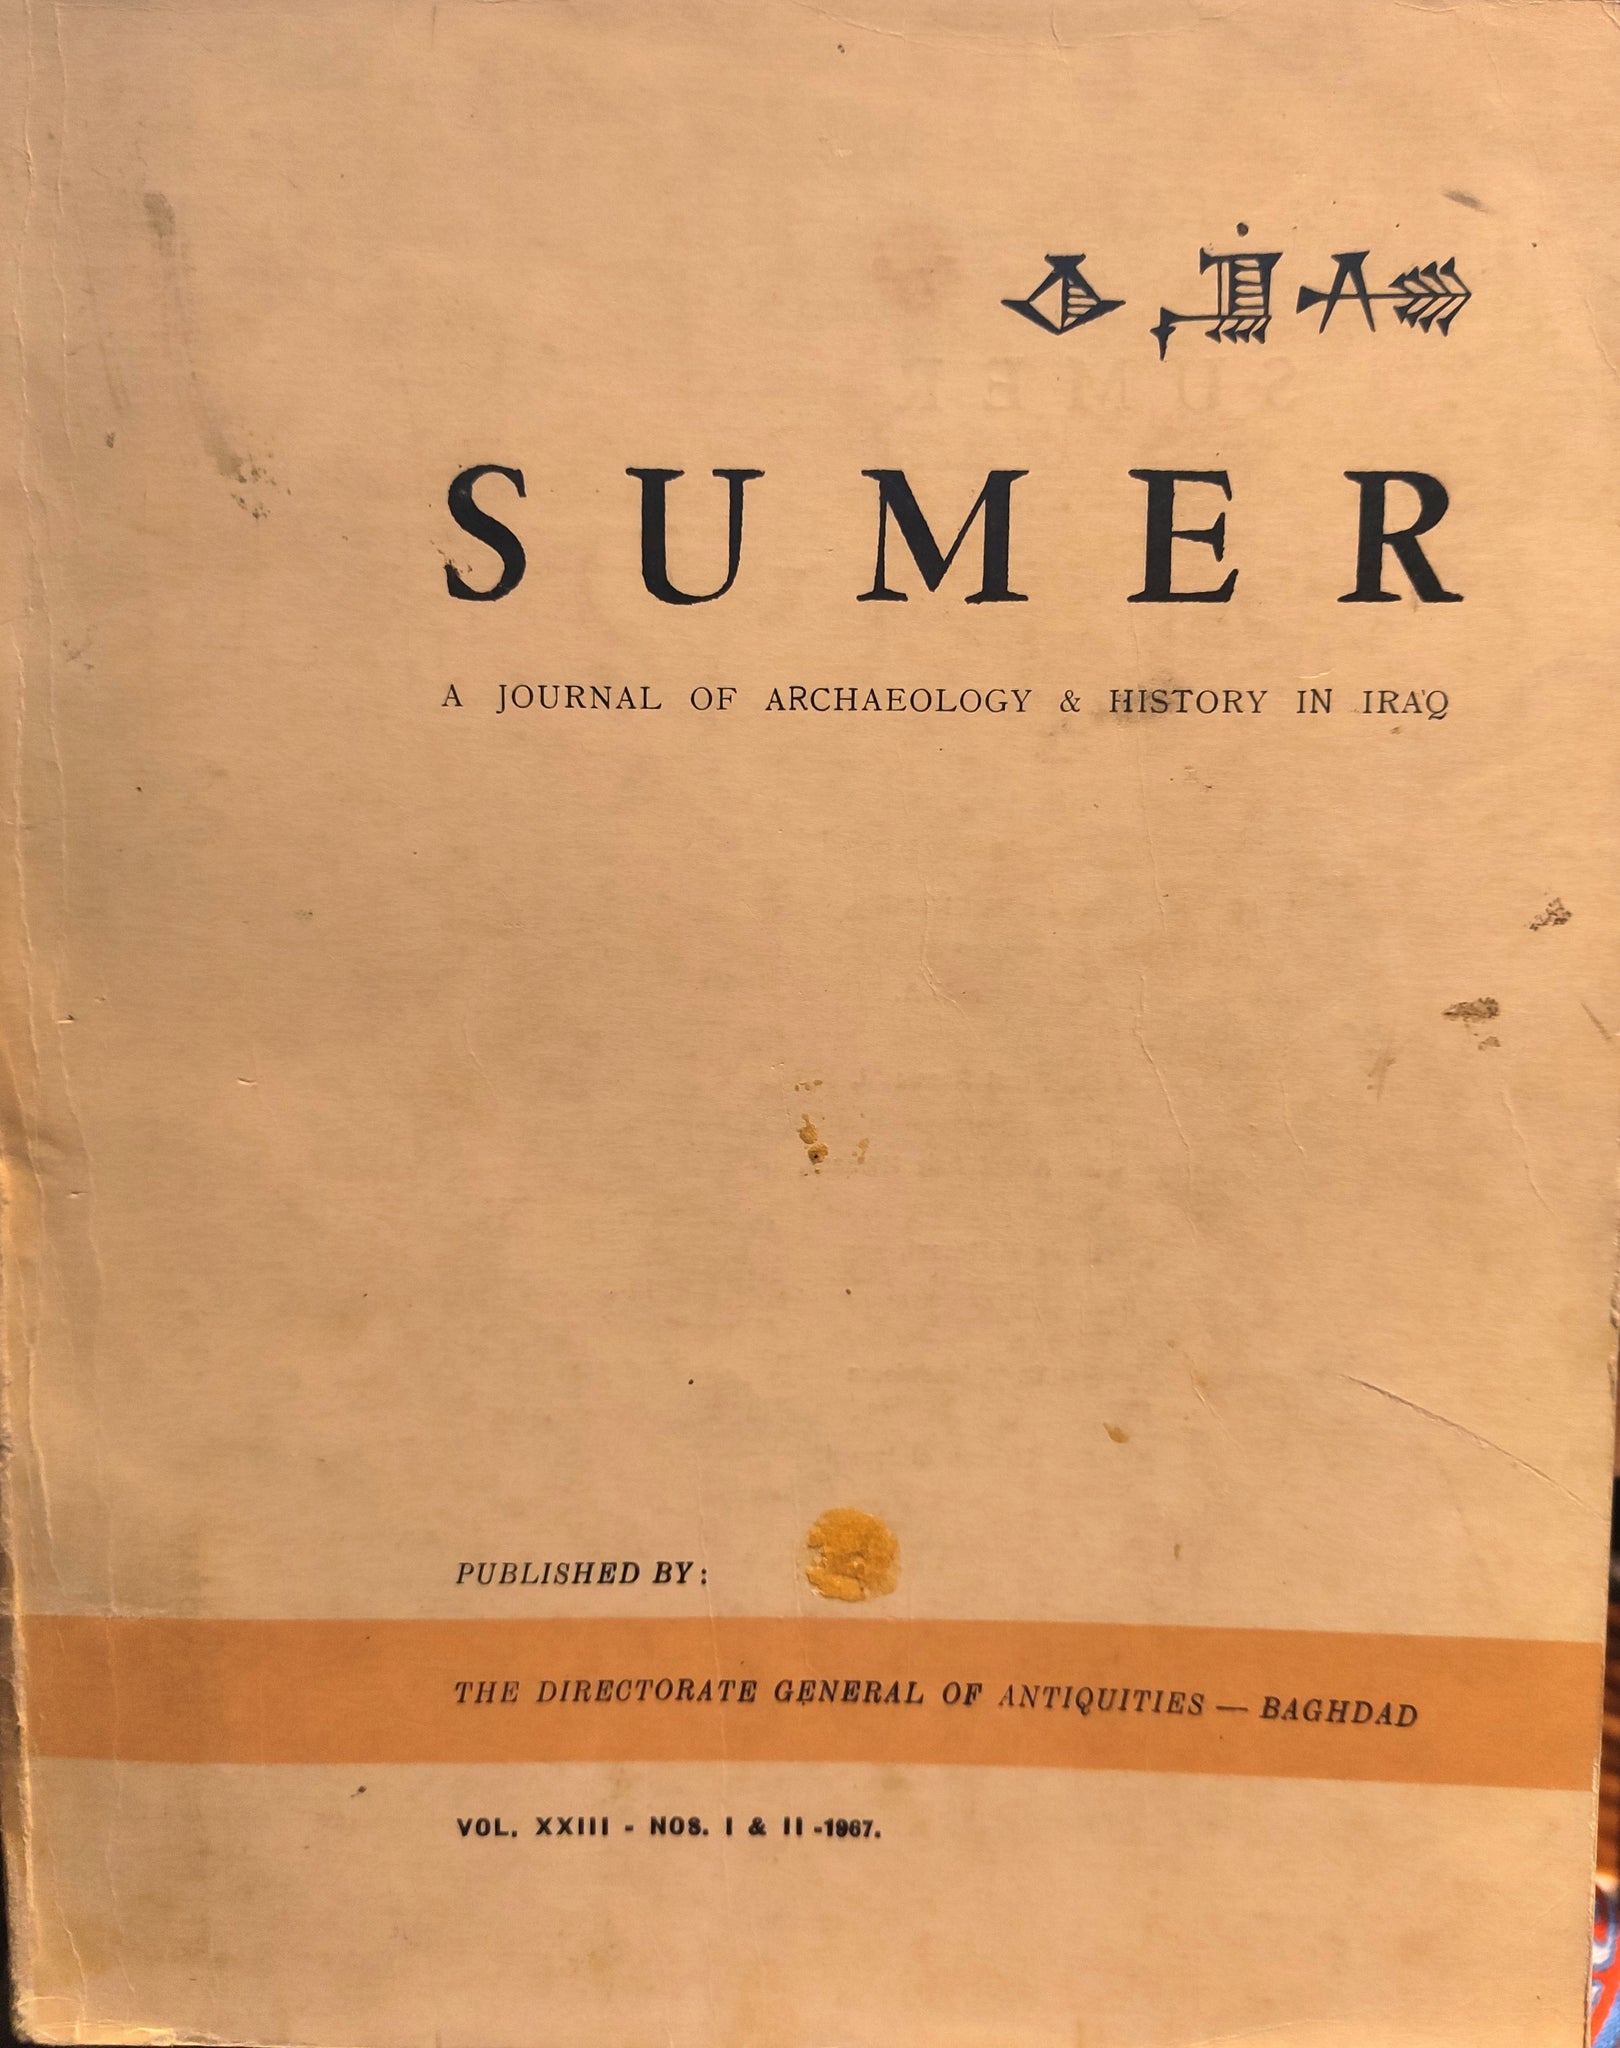 Sumer: A Journal of Archaeology and History in Iraq. Vol XXIII, N°1 & 2.